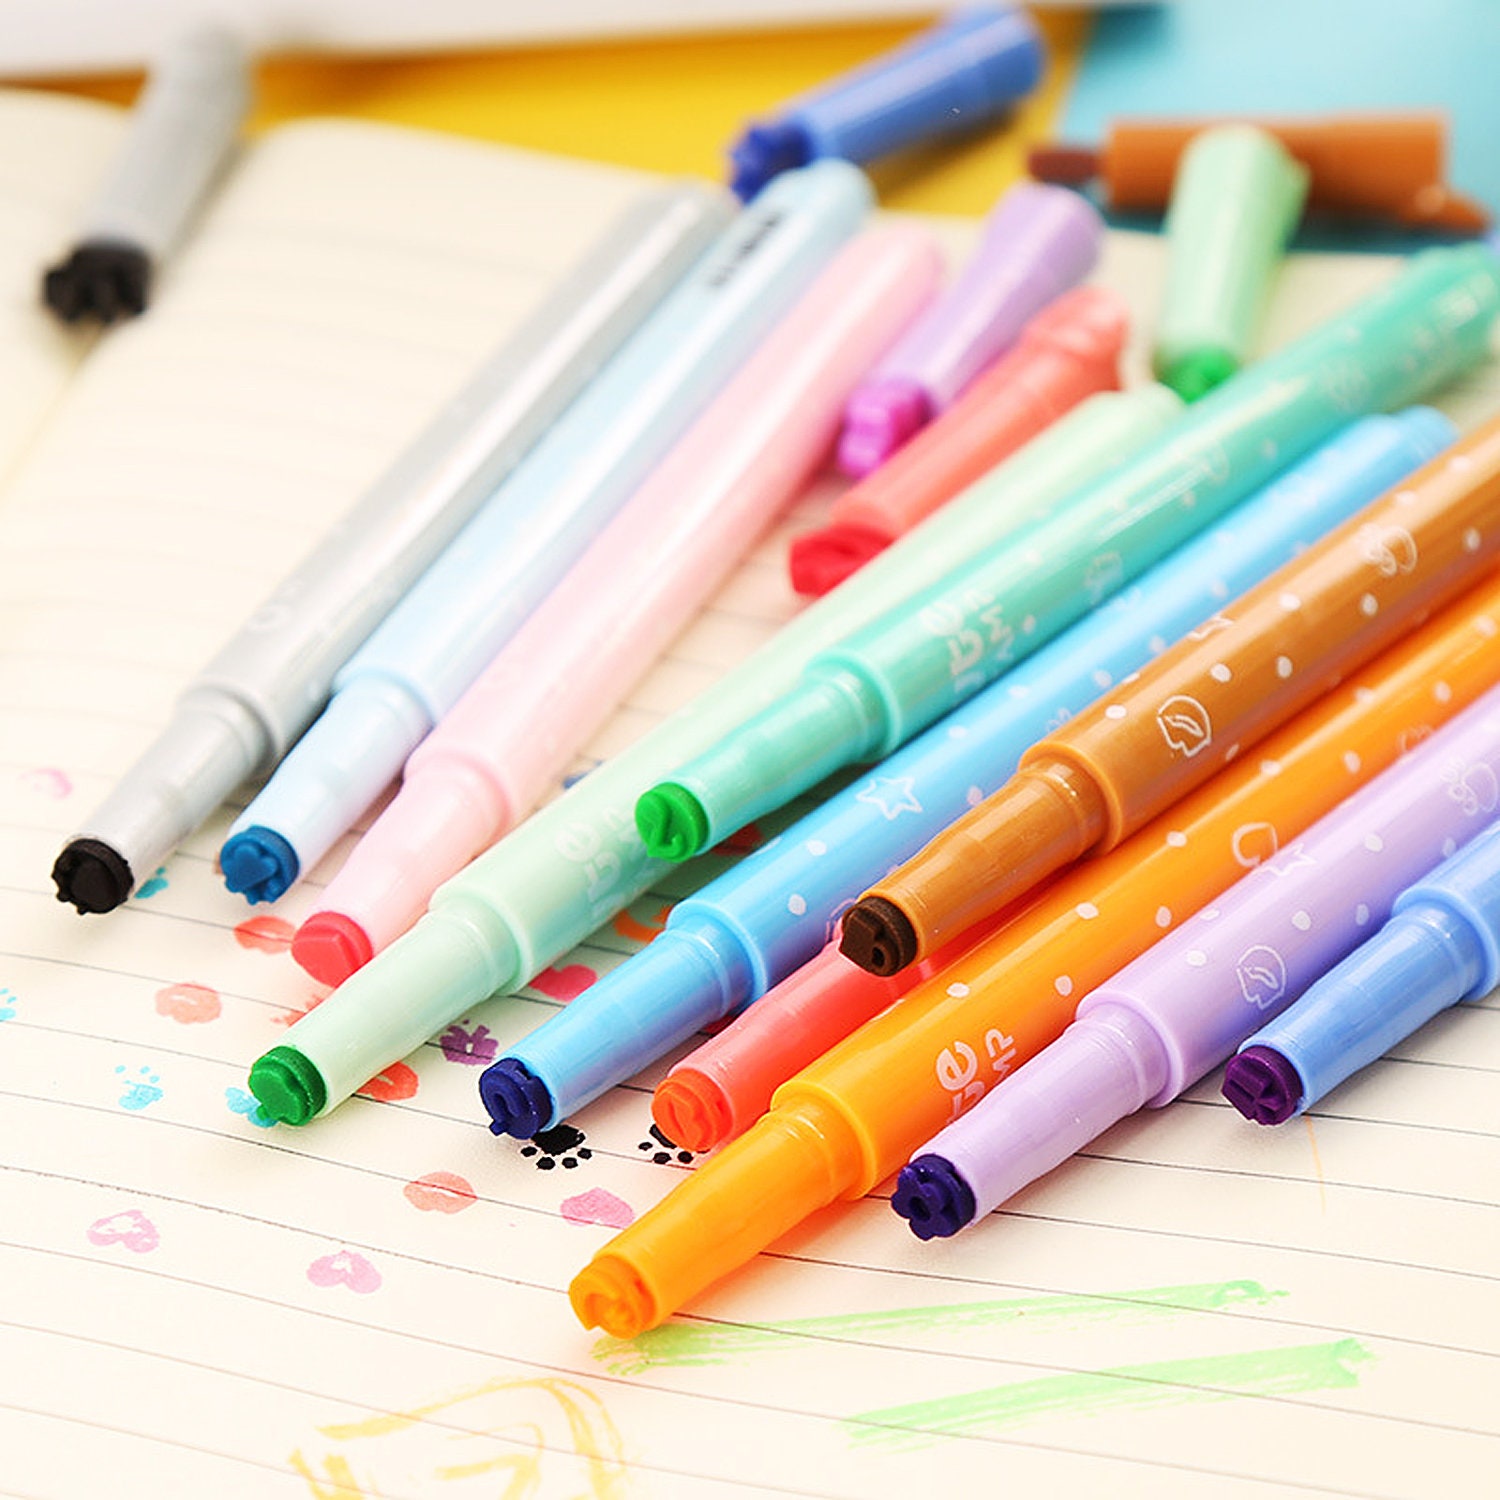 Cute Markers - Shop on Pinterest